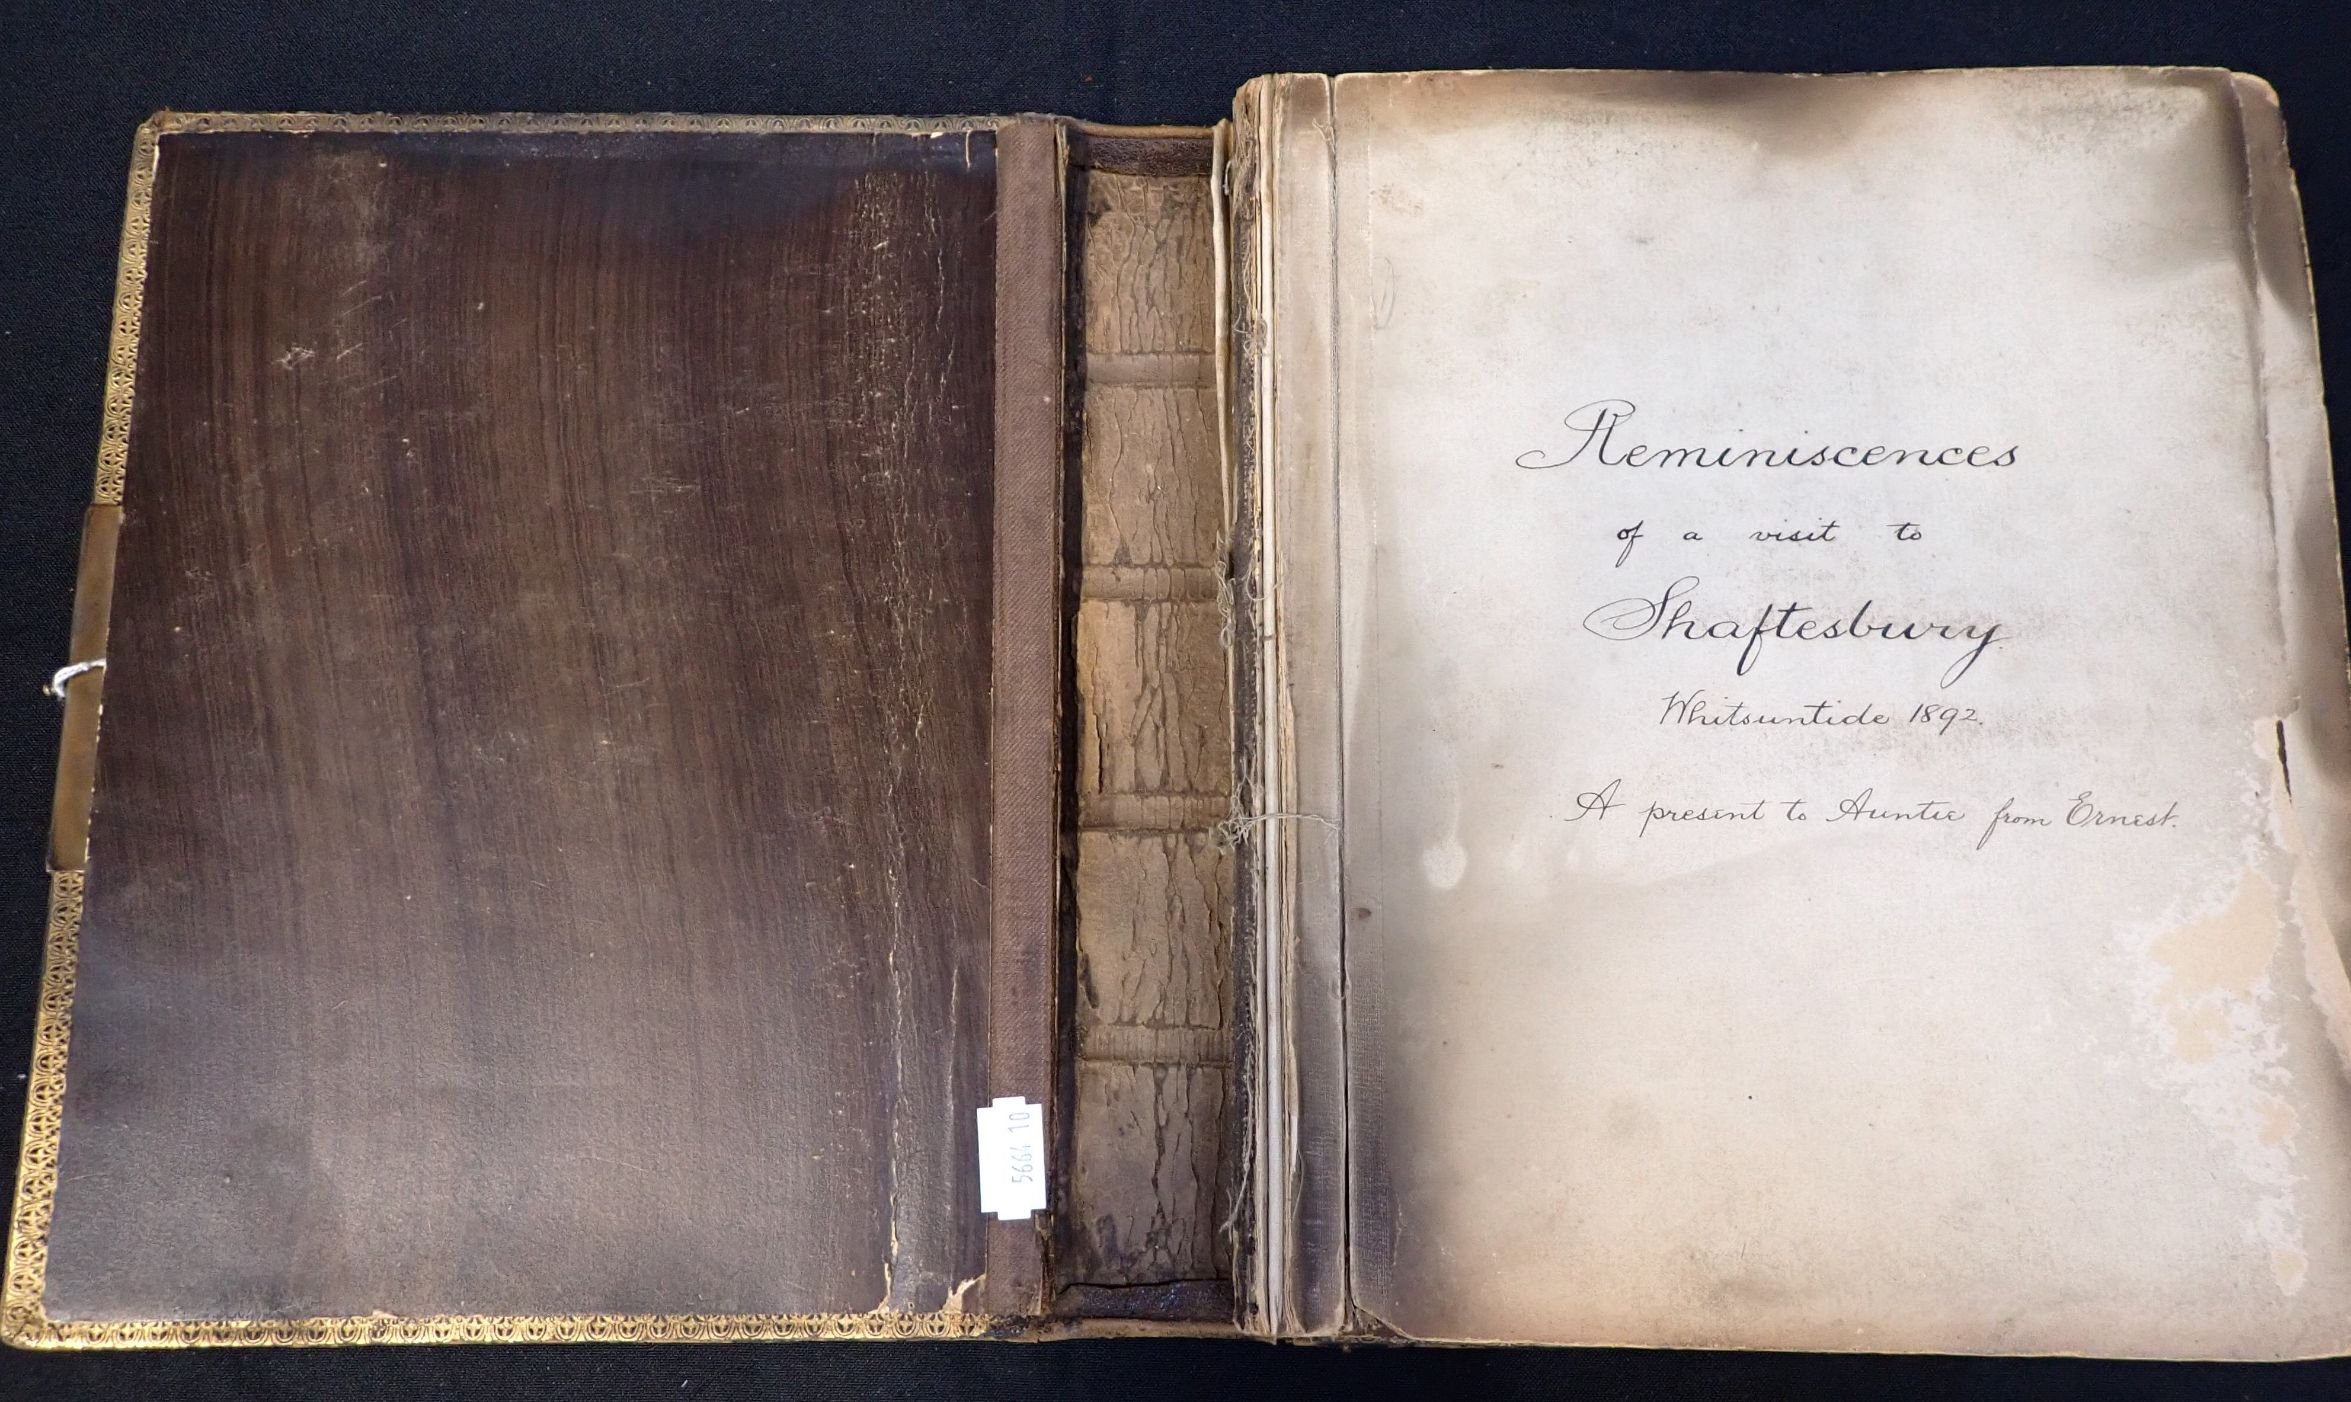 The Wiltshire Thatcher photograph album, showing the split spine and smoke damaged pages. The title page reads 'Reminiscences of a visit to Shaftesbury, Whitsuntide 1892, a present to Auntie from Ernest'.